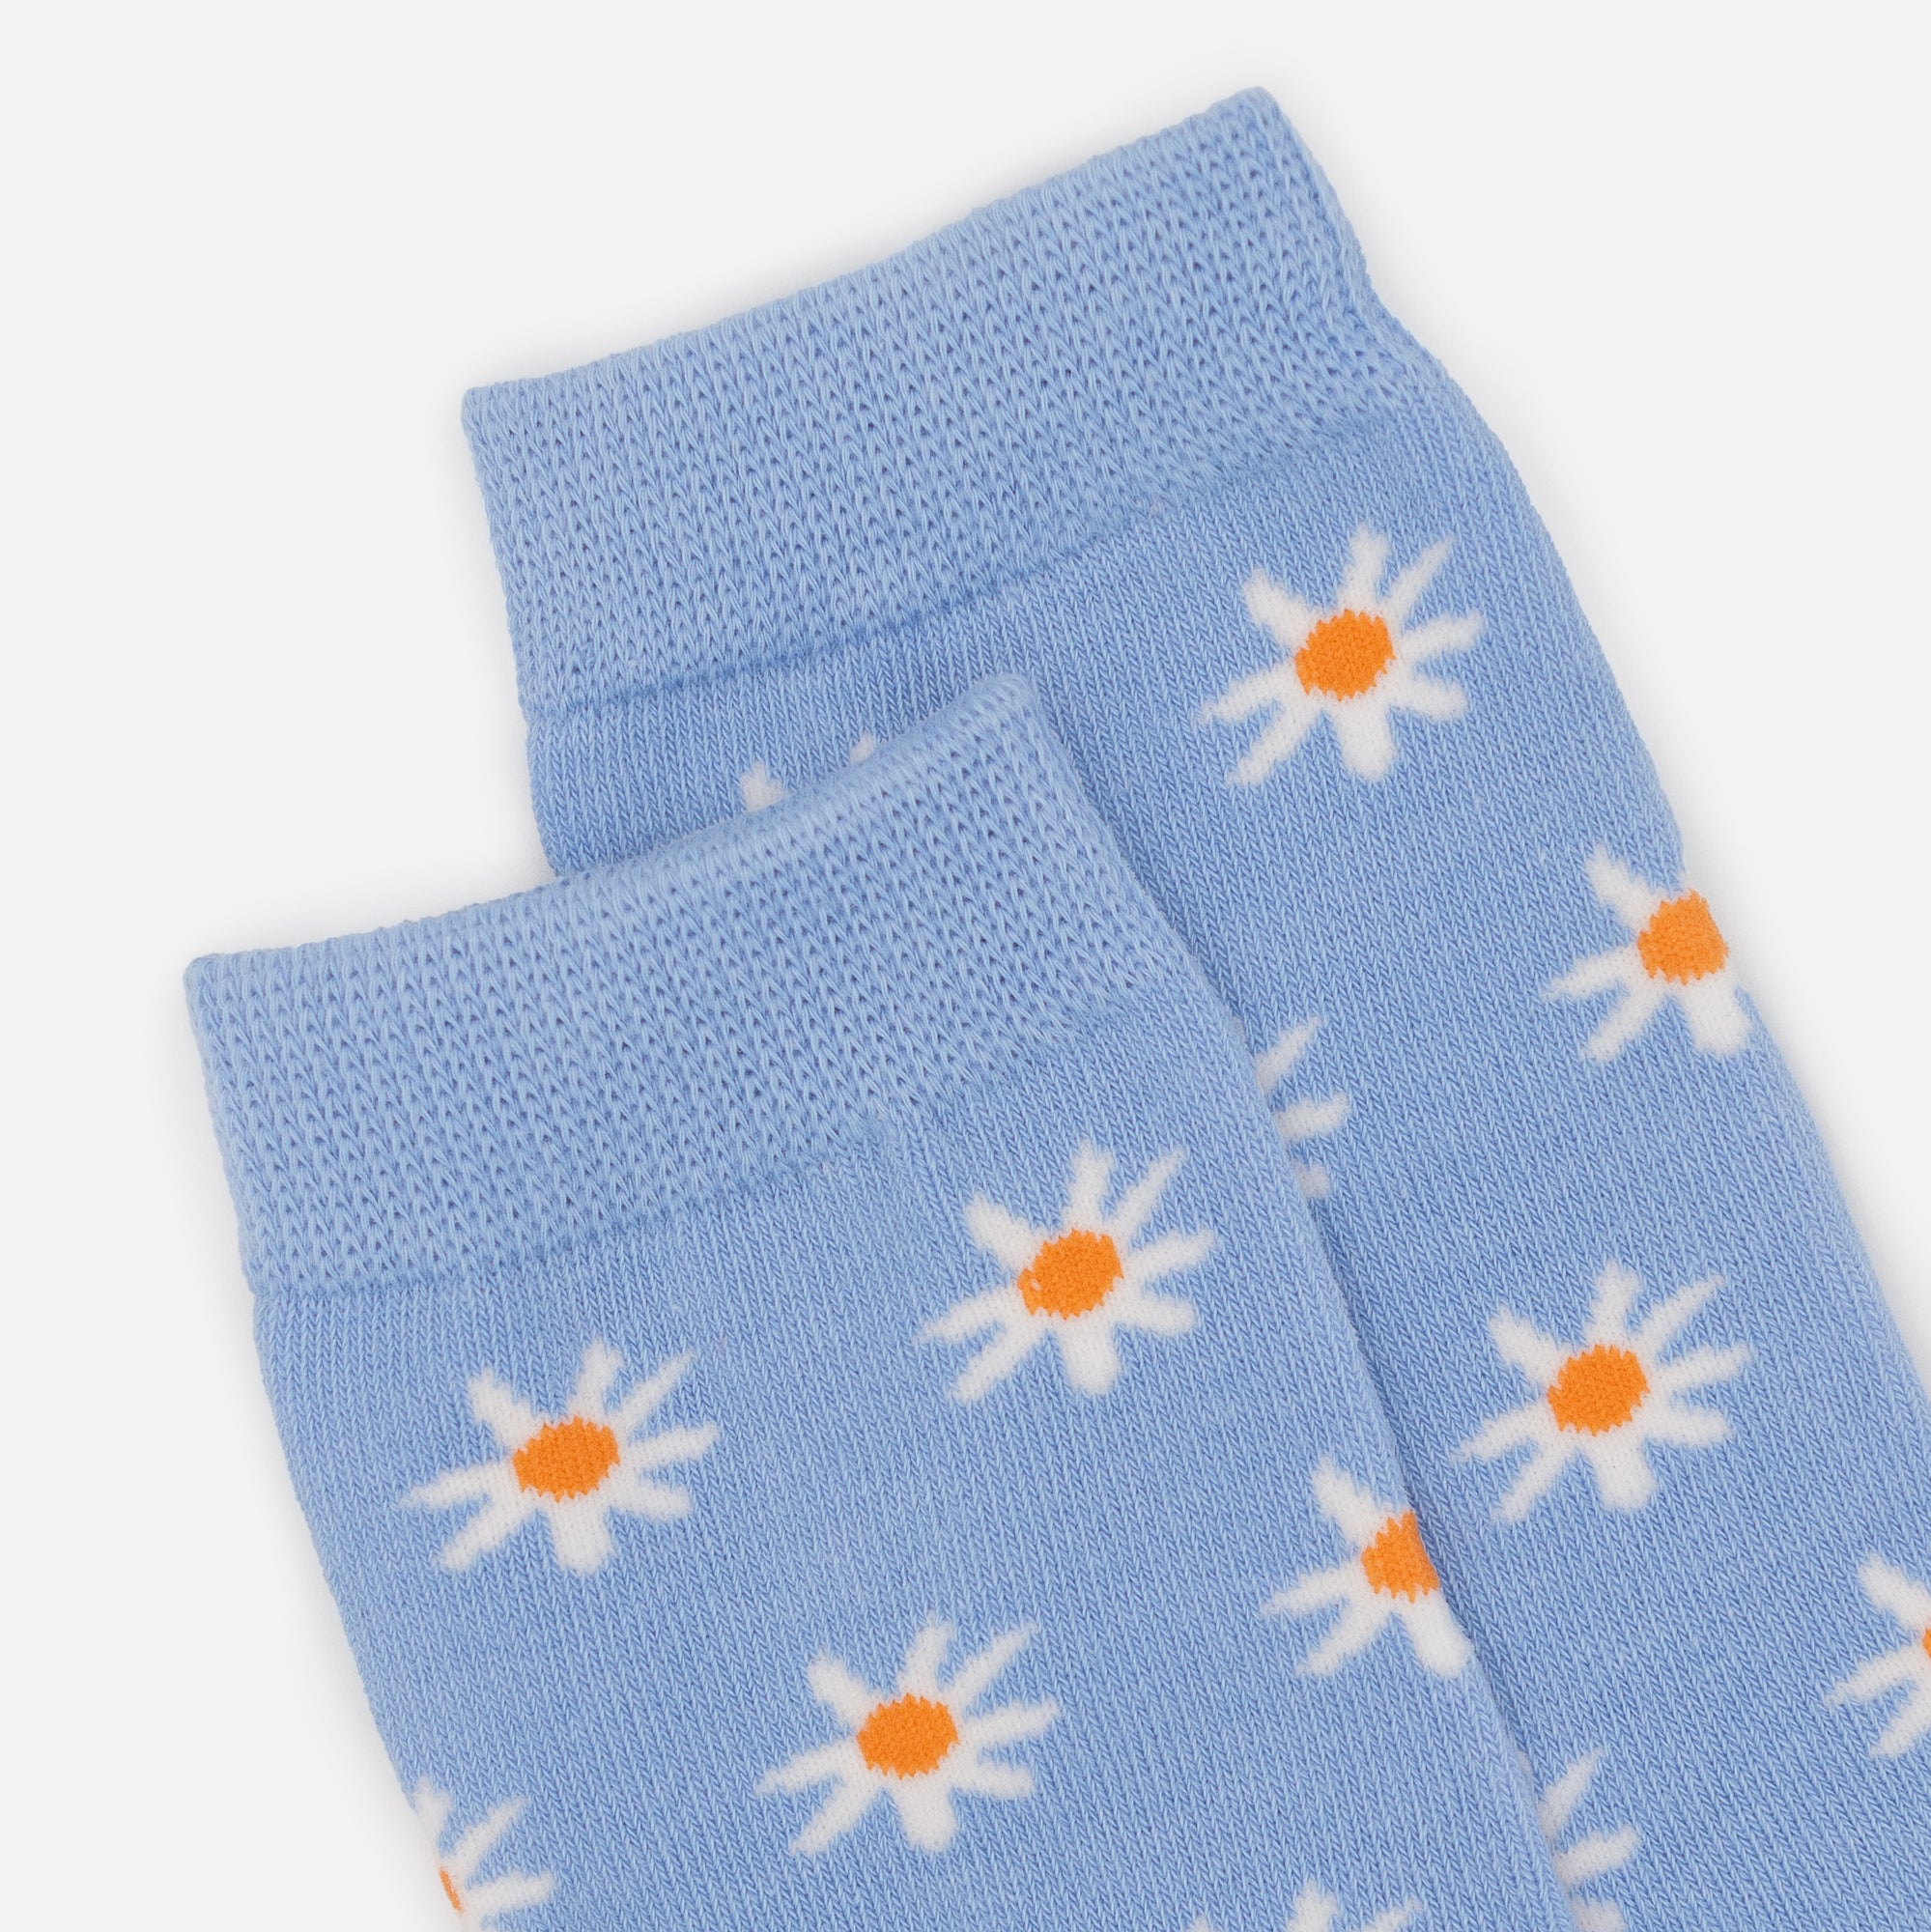 Pale blue stockings with white flowers